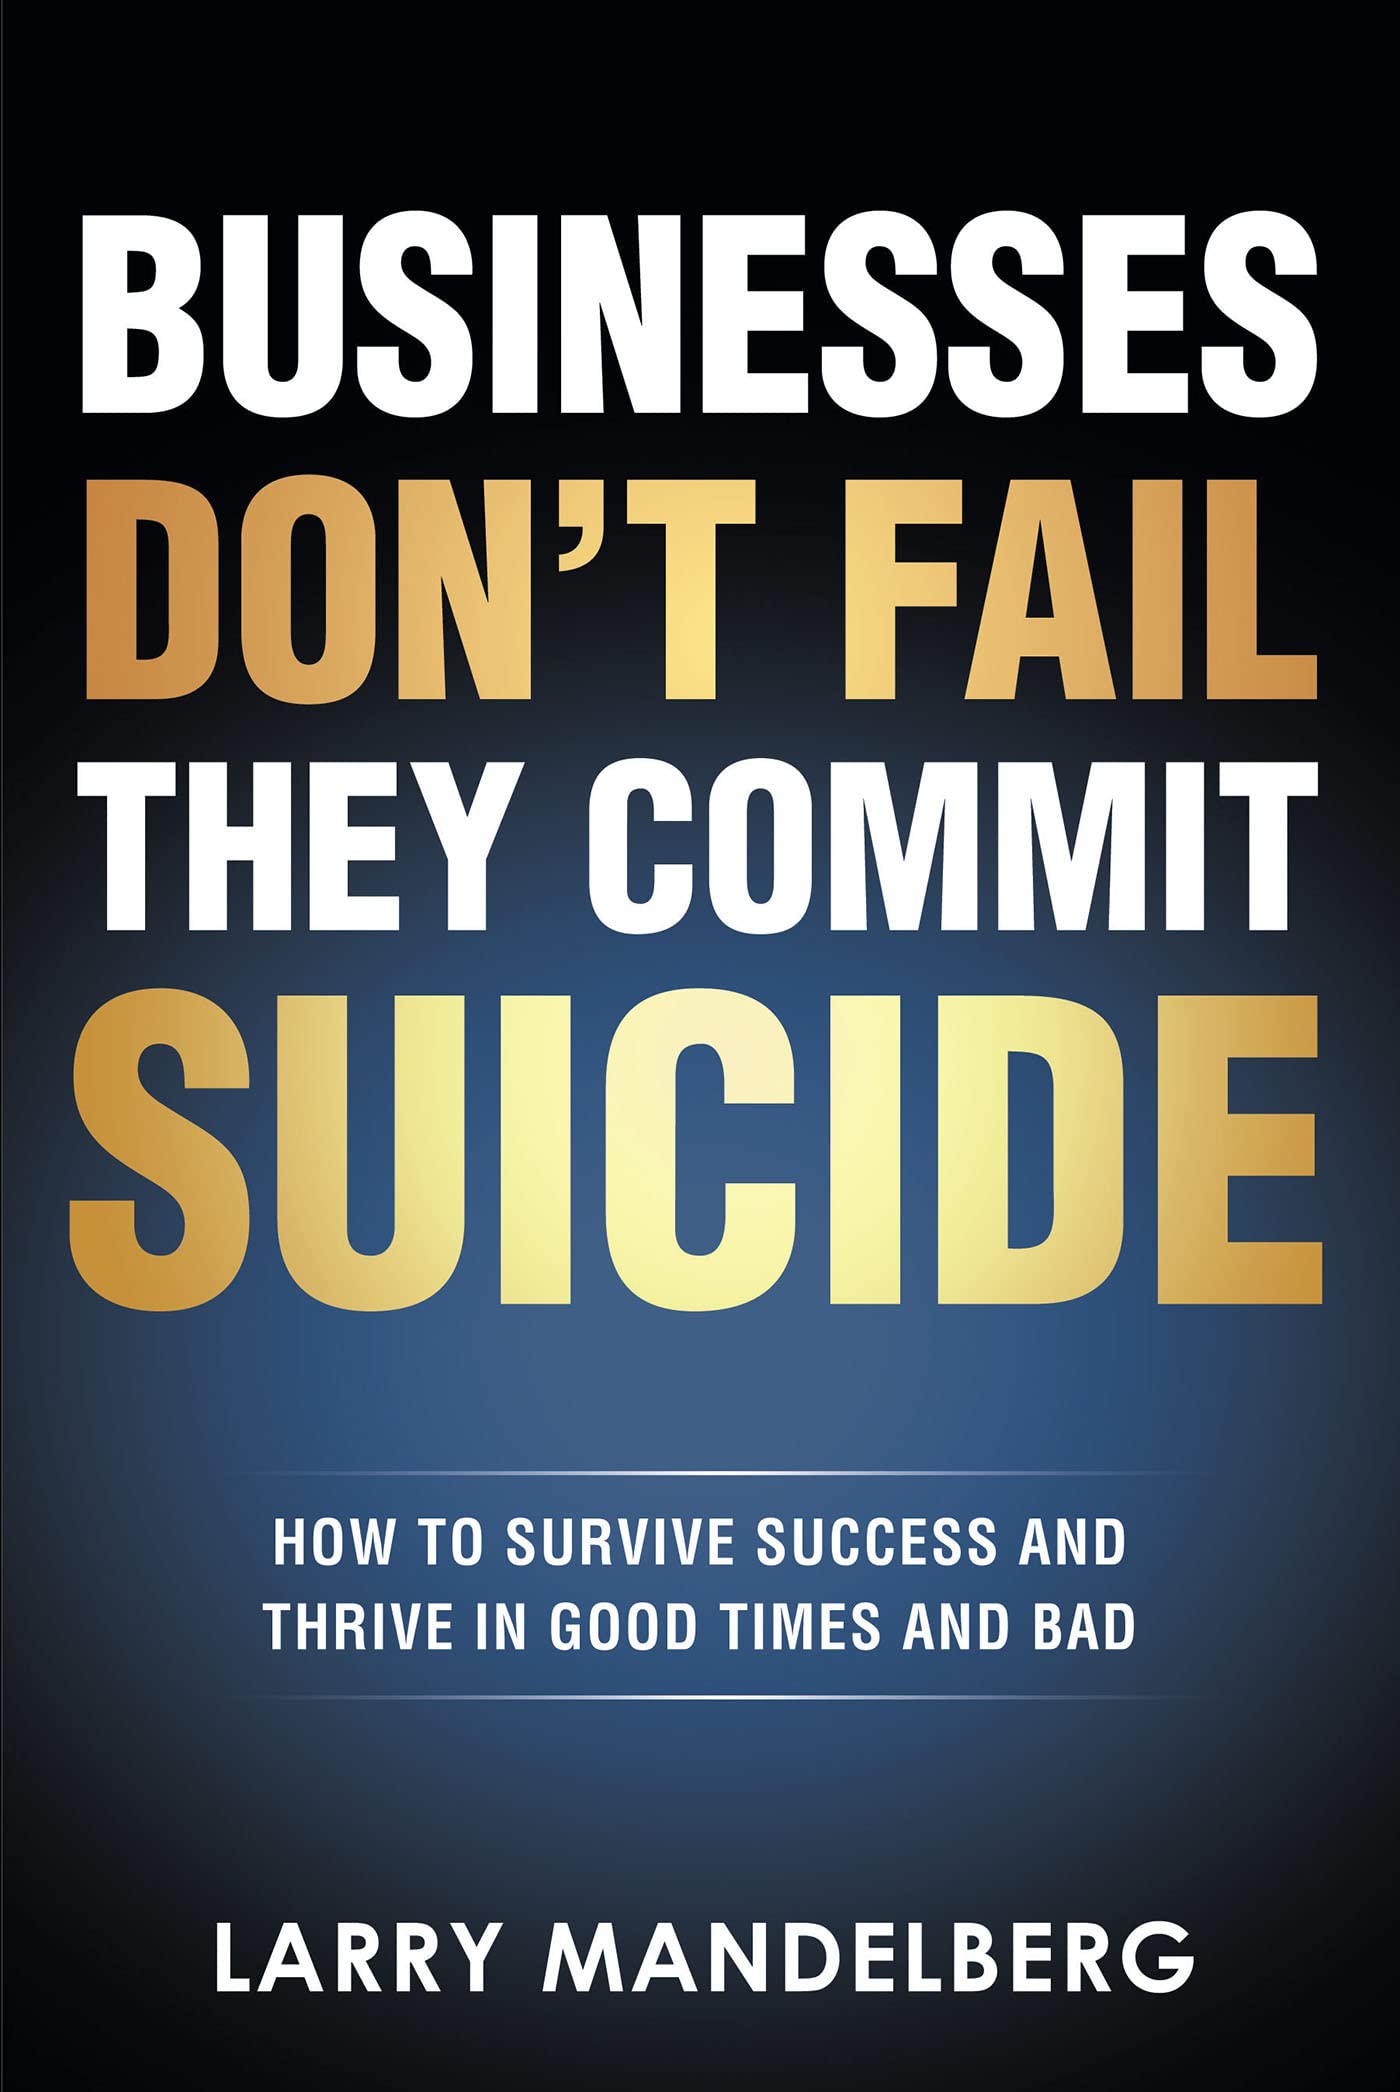 Businesses Don't Fail They Commit Suicide: How to Survive Success and Thrive in Good Times and Bad